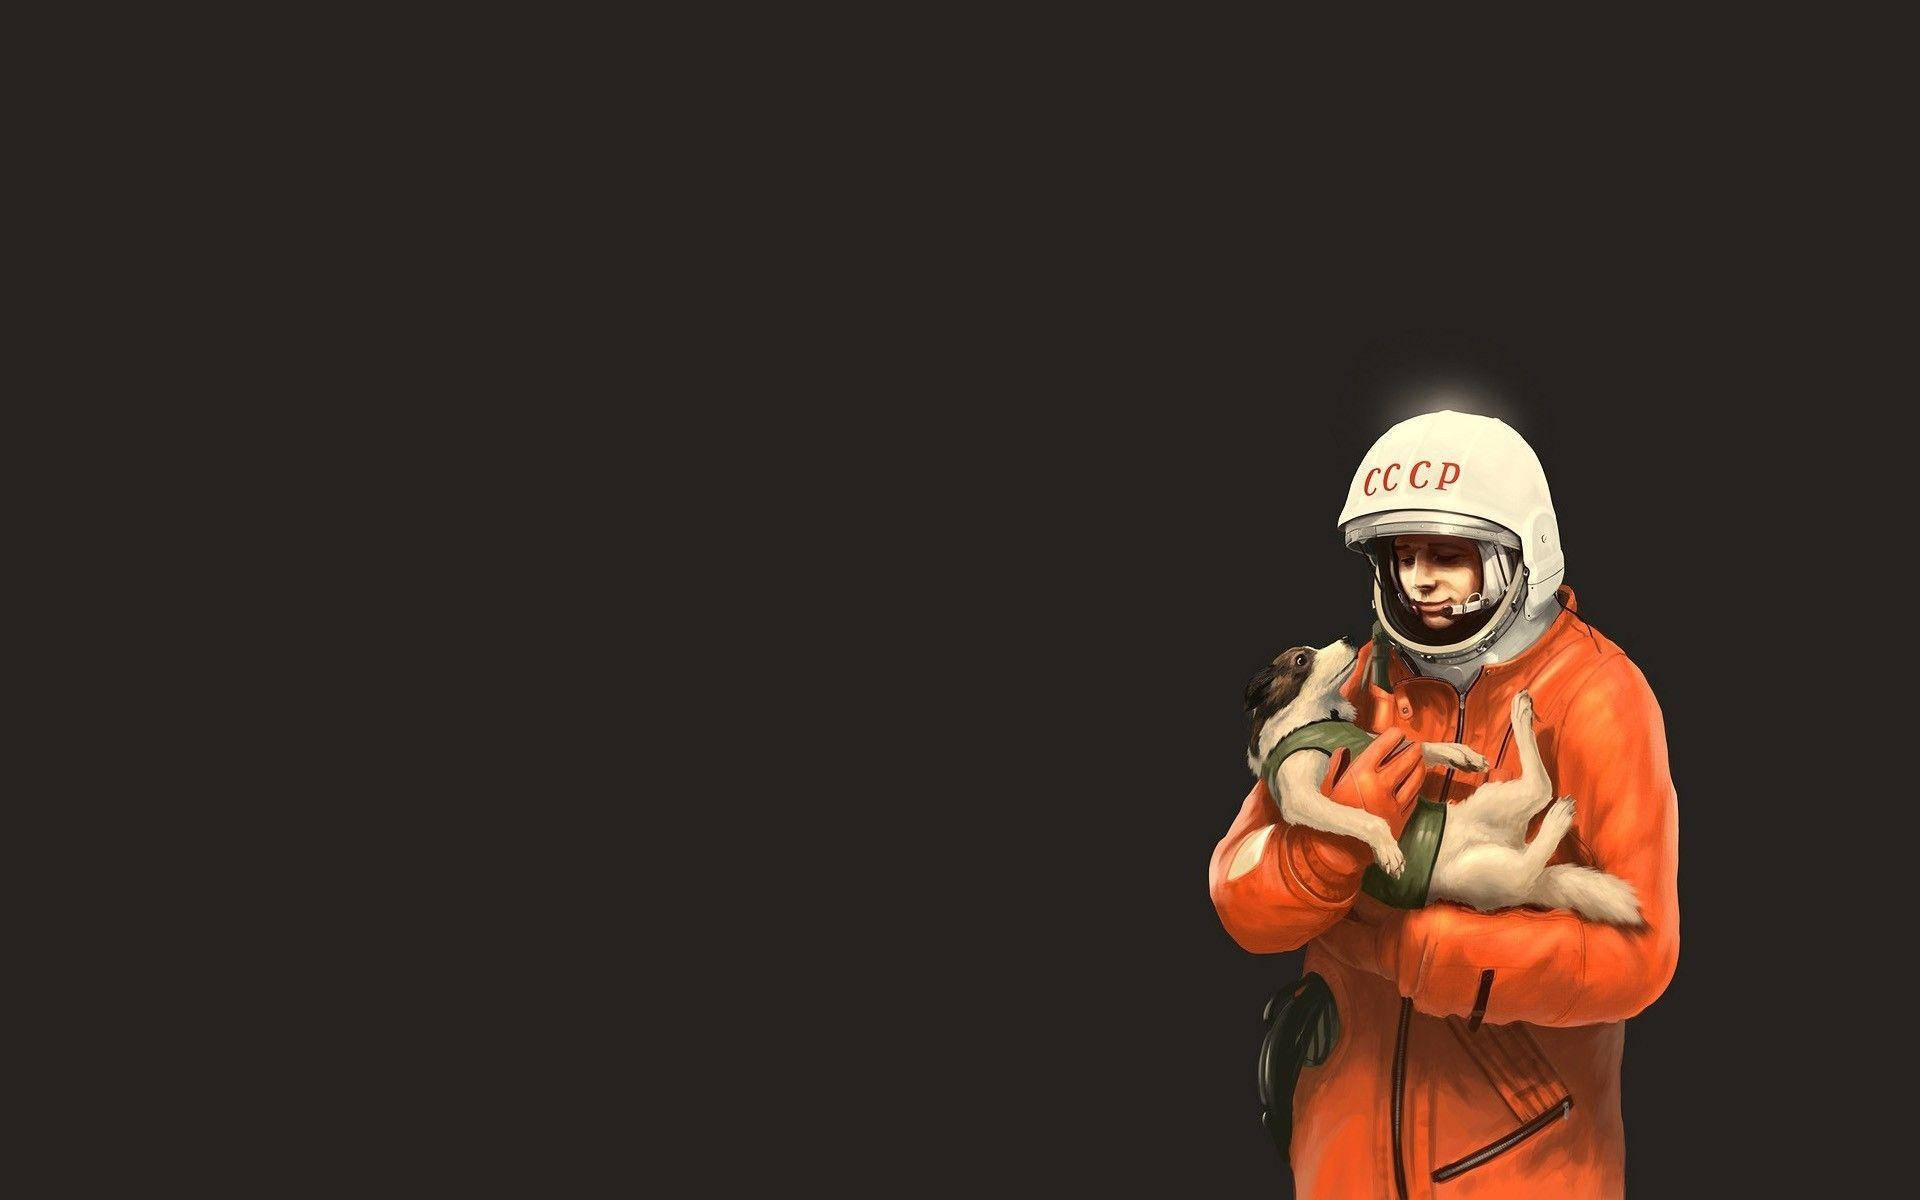 Image Of Spaceman Snuggling A Dog Background